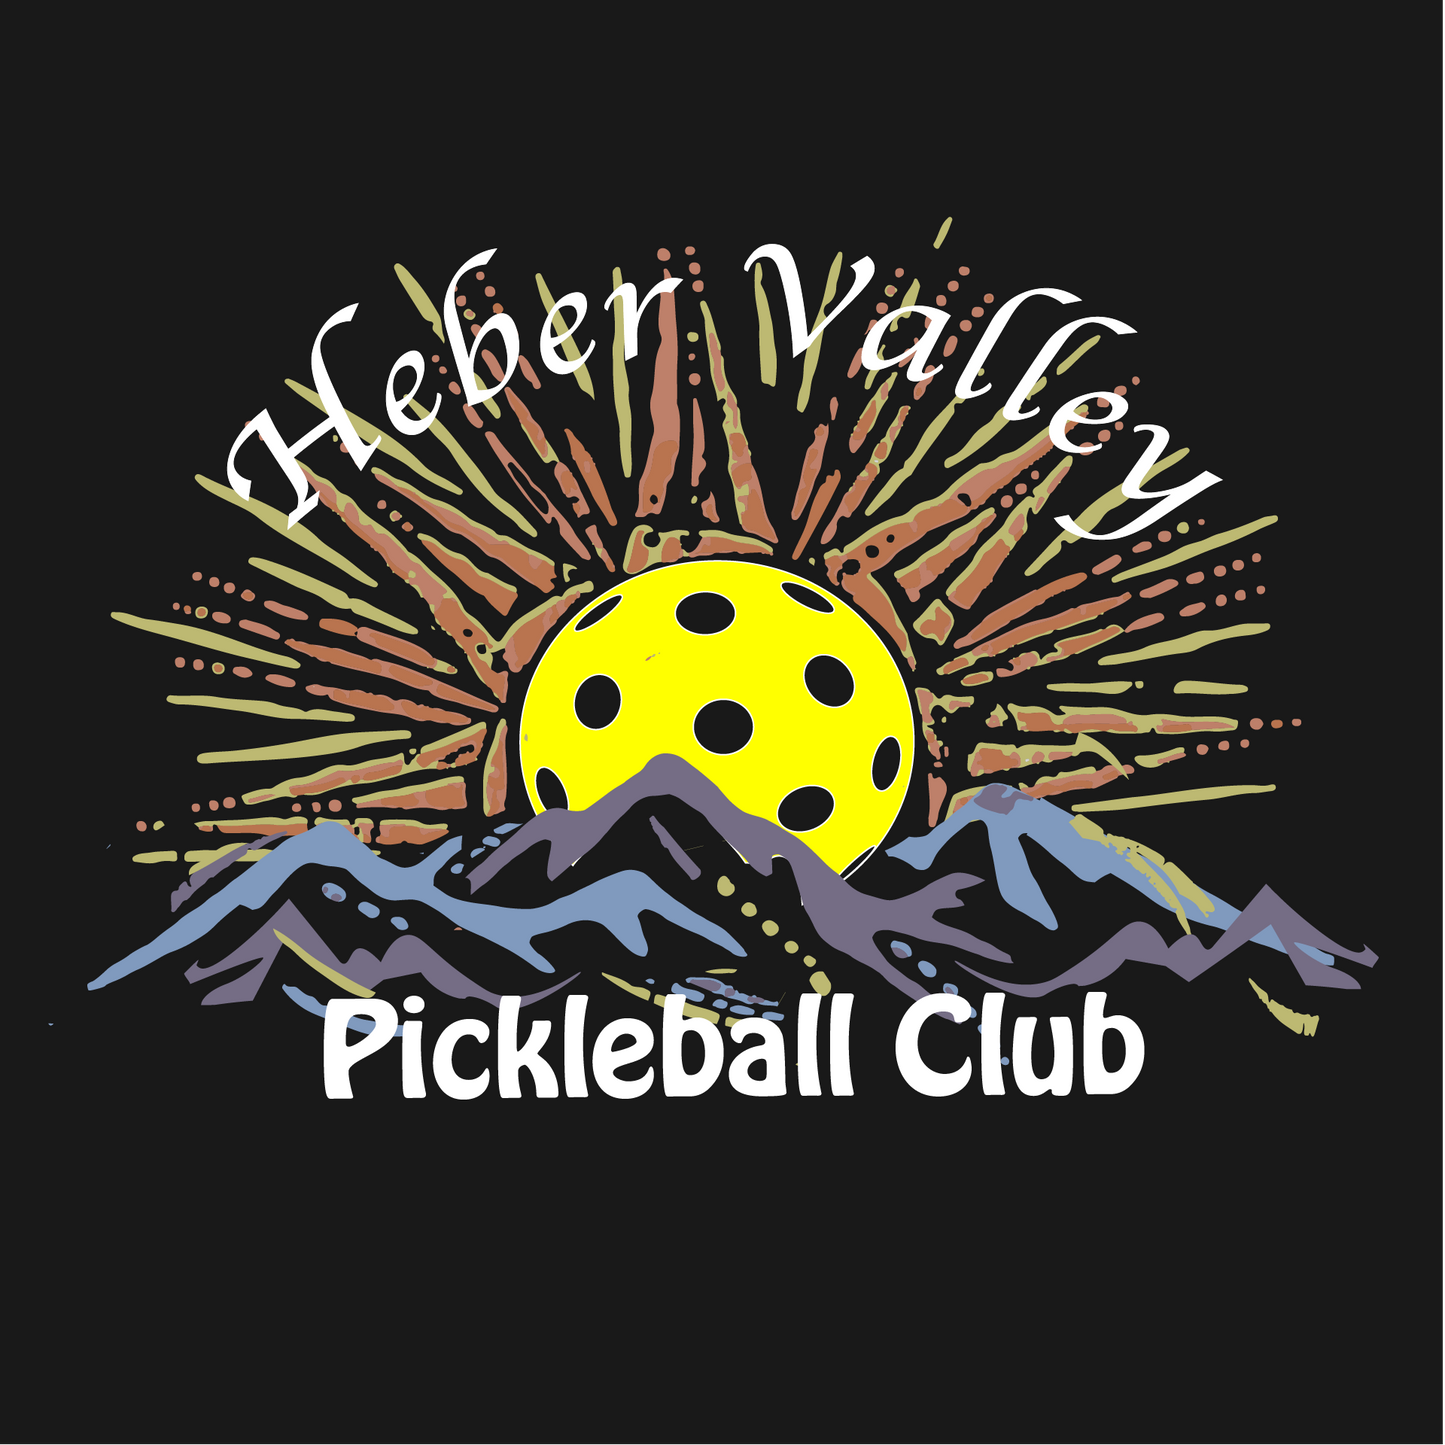 Heber Valley Pickleball Club (Small) | Women’s Short Sleeve Crewneck Athletic Shirts | 100% Polyester